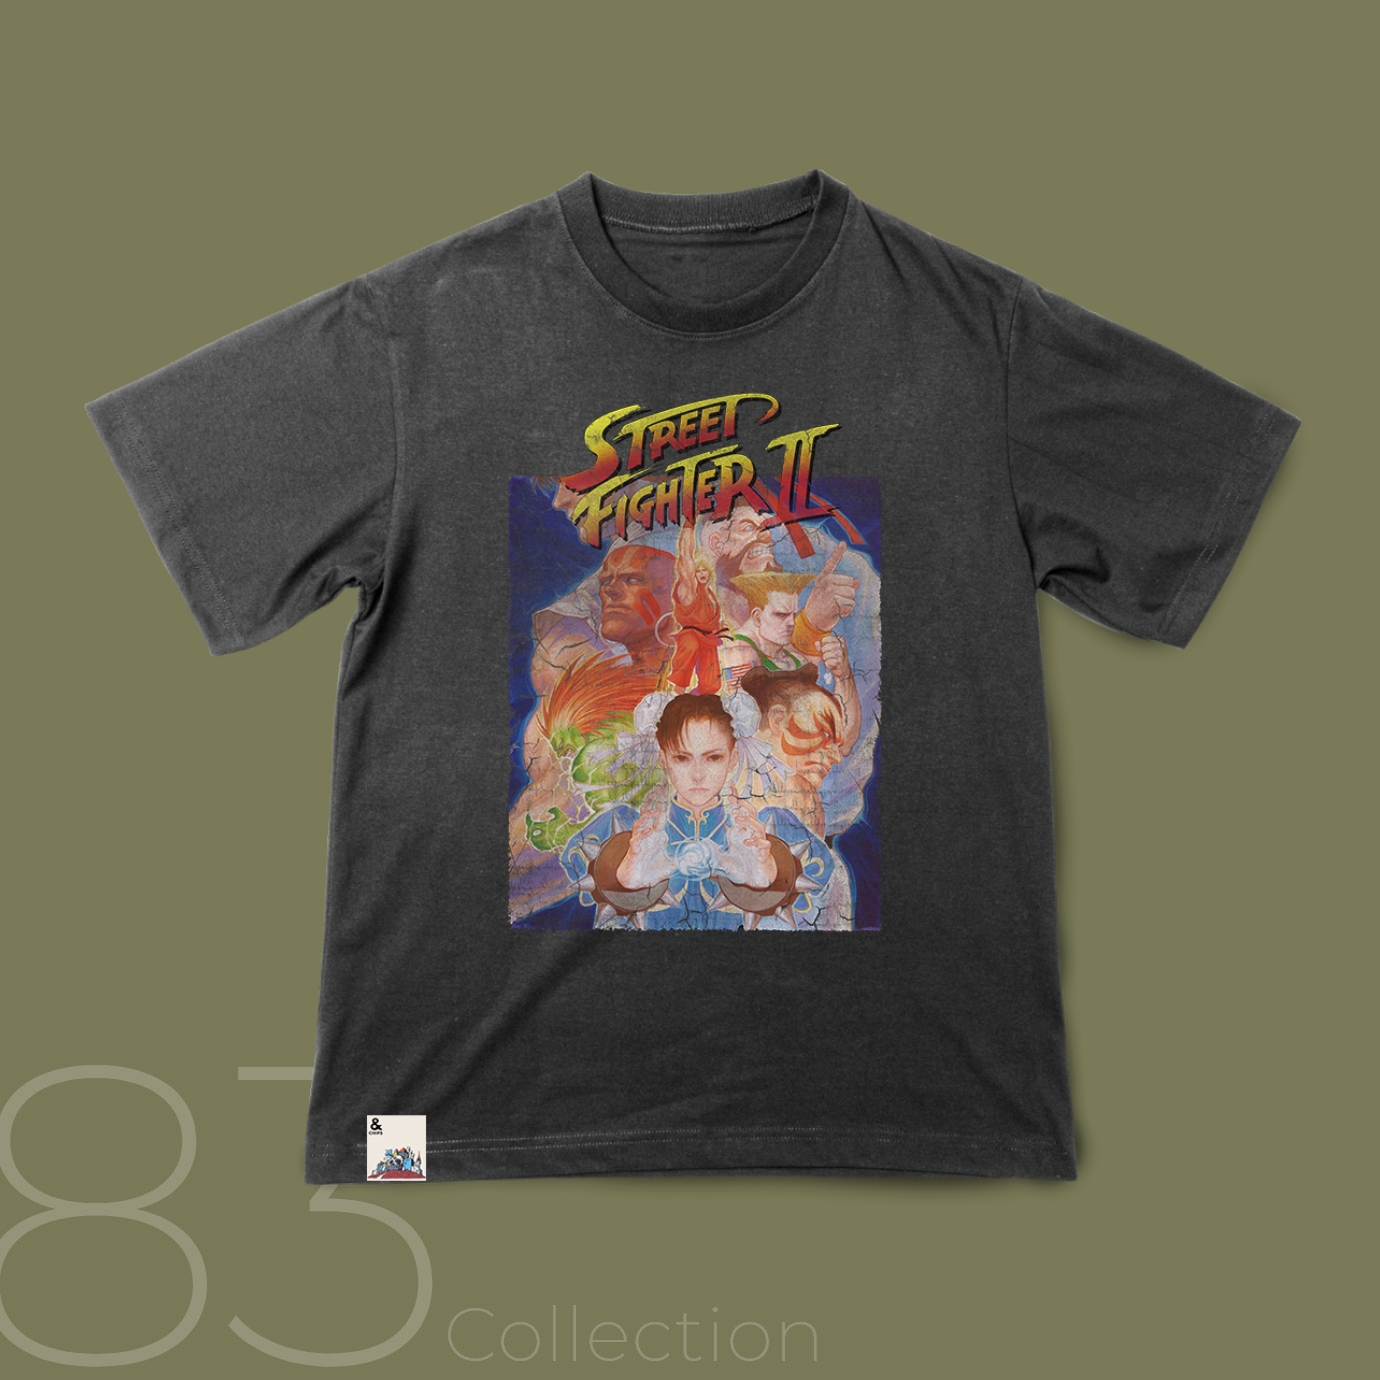 83 COLLECTION × ストリートファイターII Tシャツ | & CHIPS （AND 